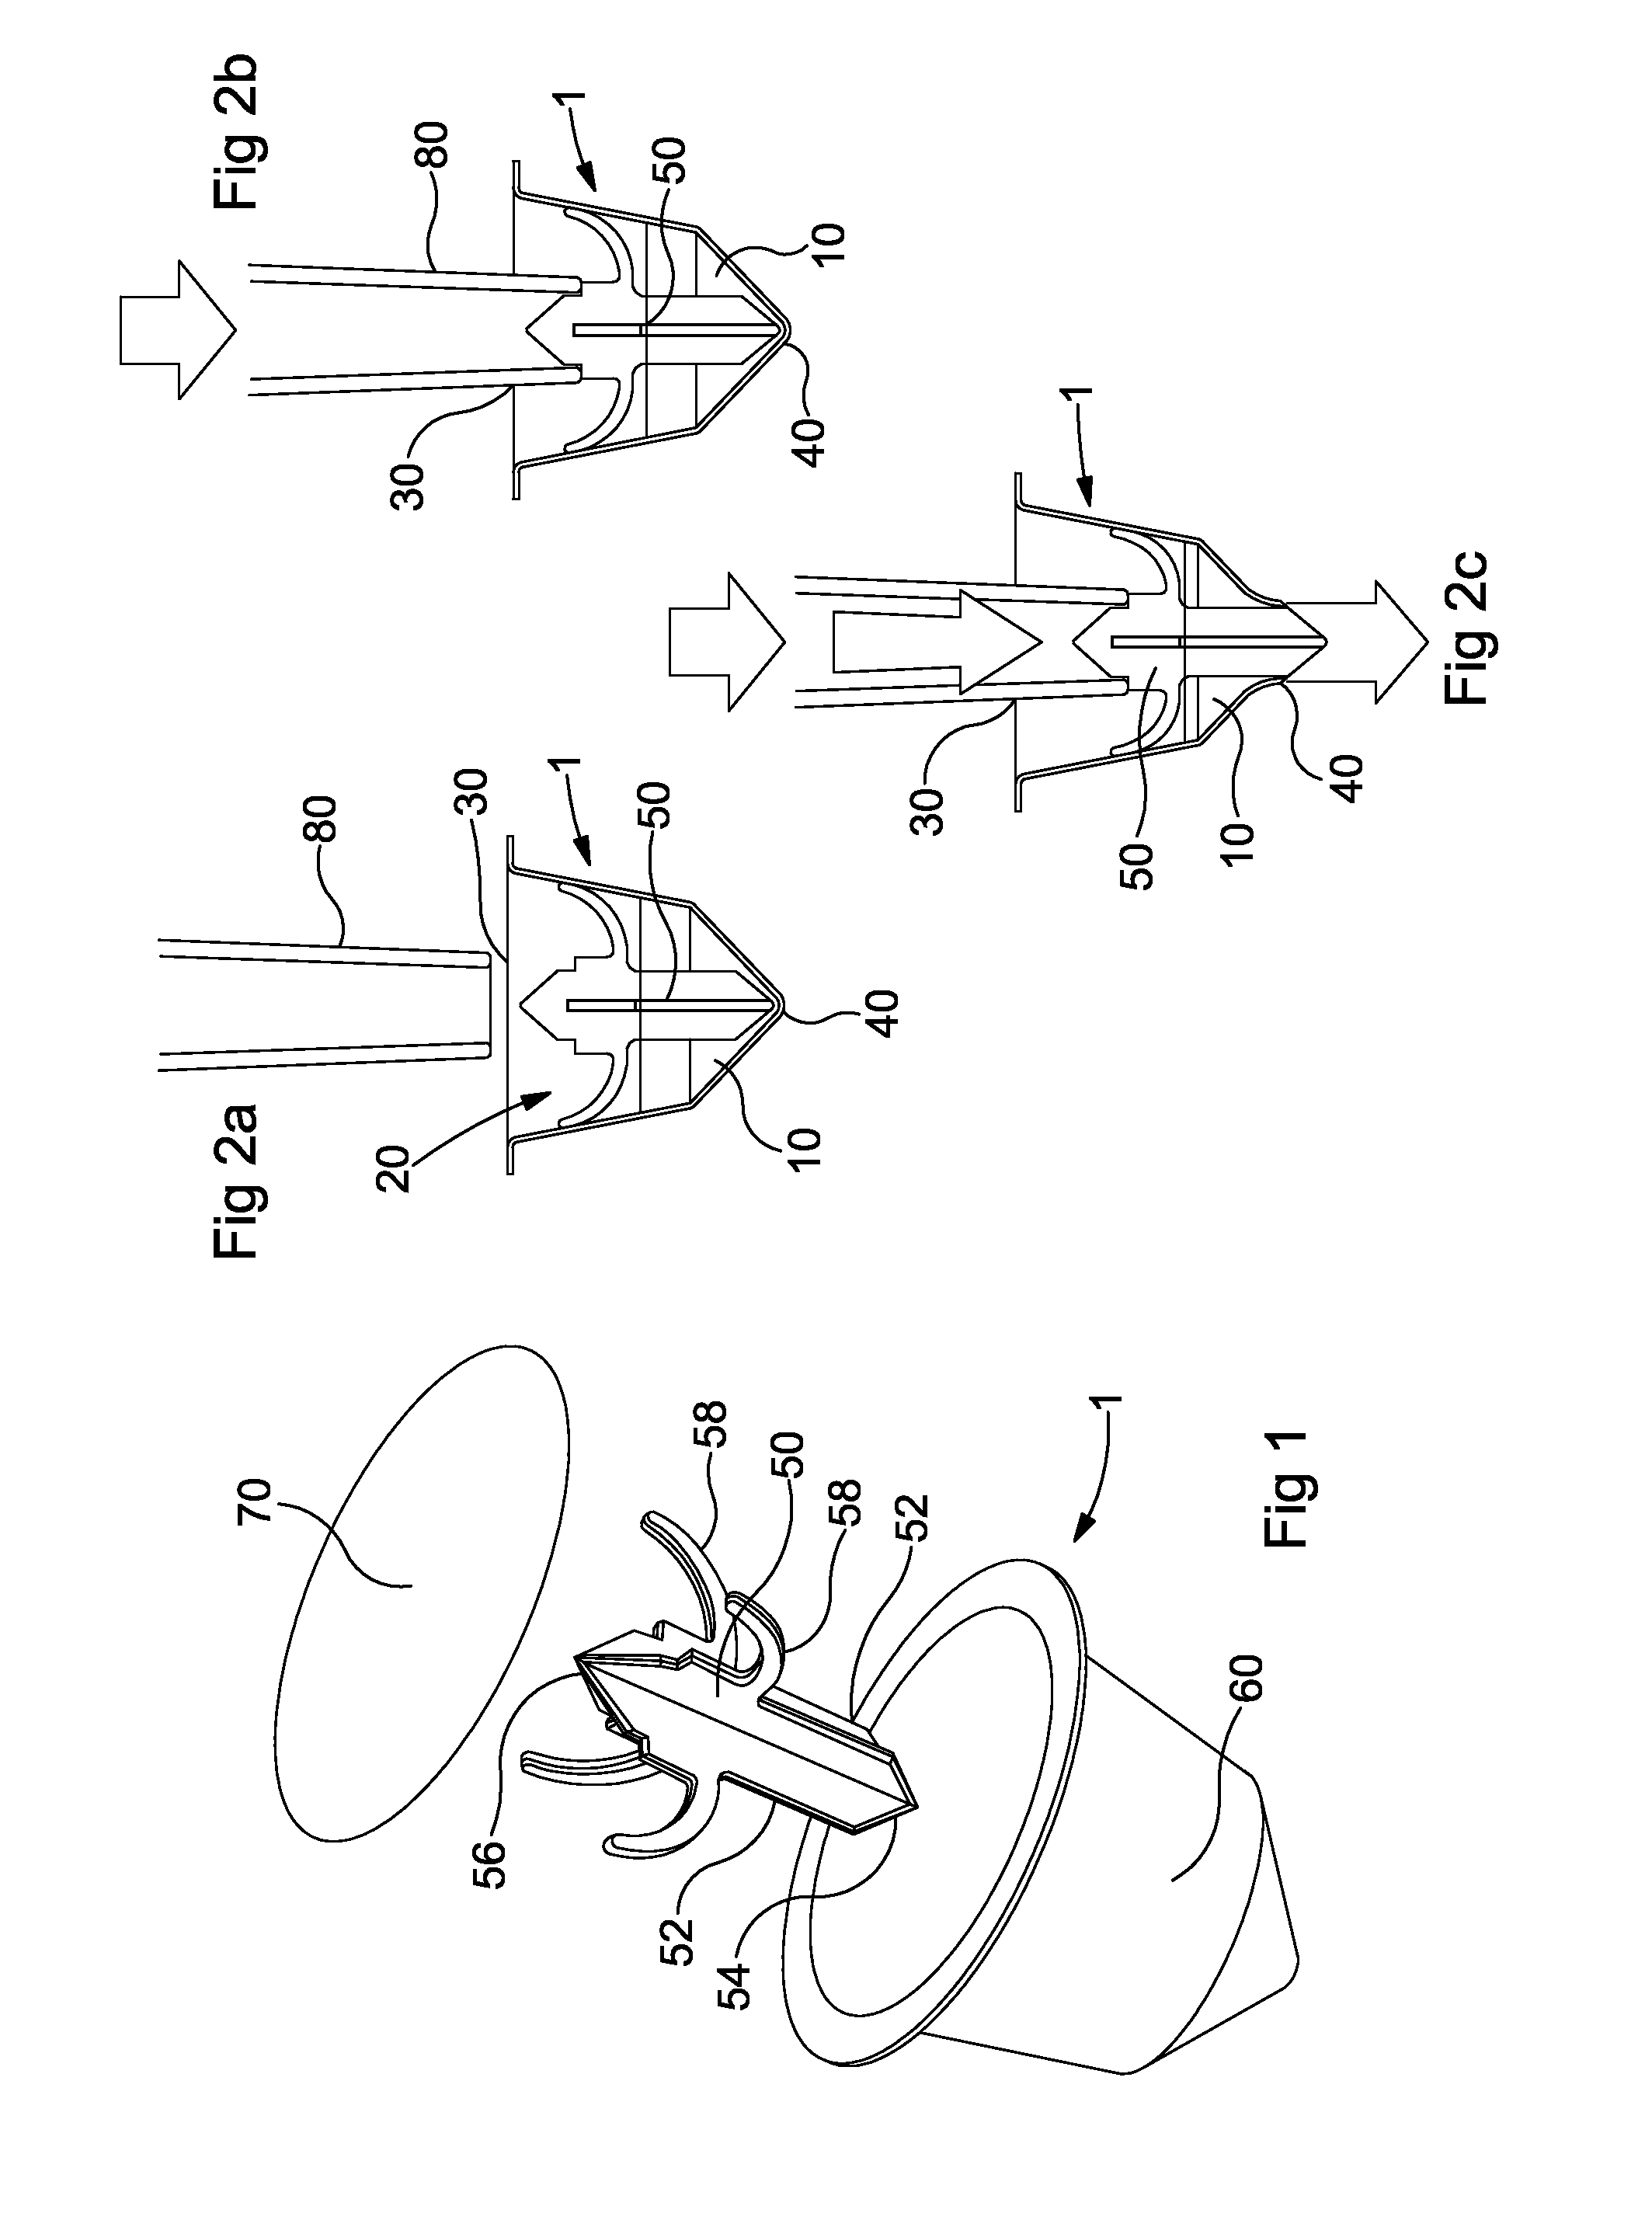 Dispensing apparatus and capsule for use therewith